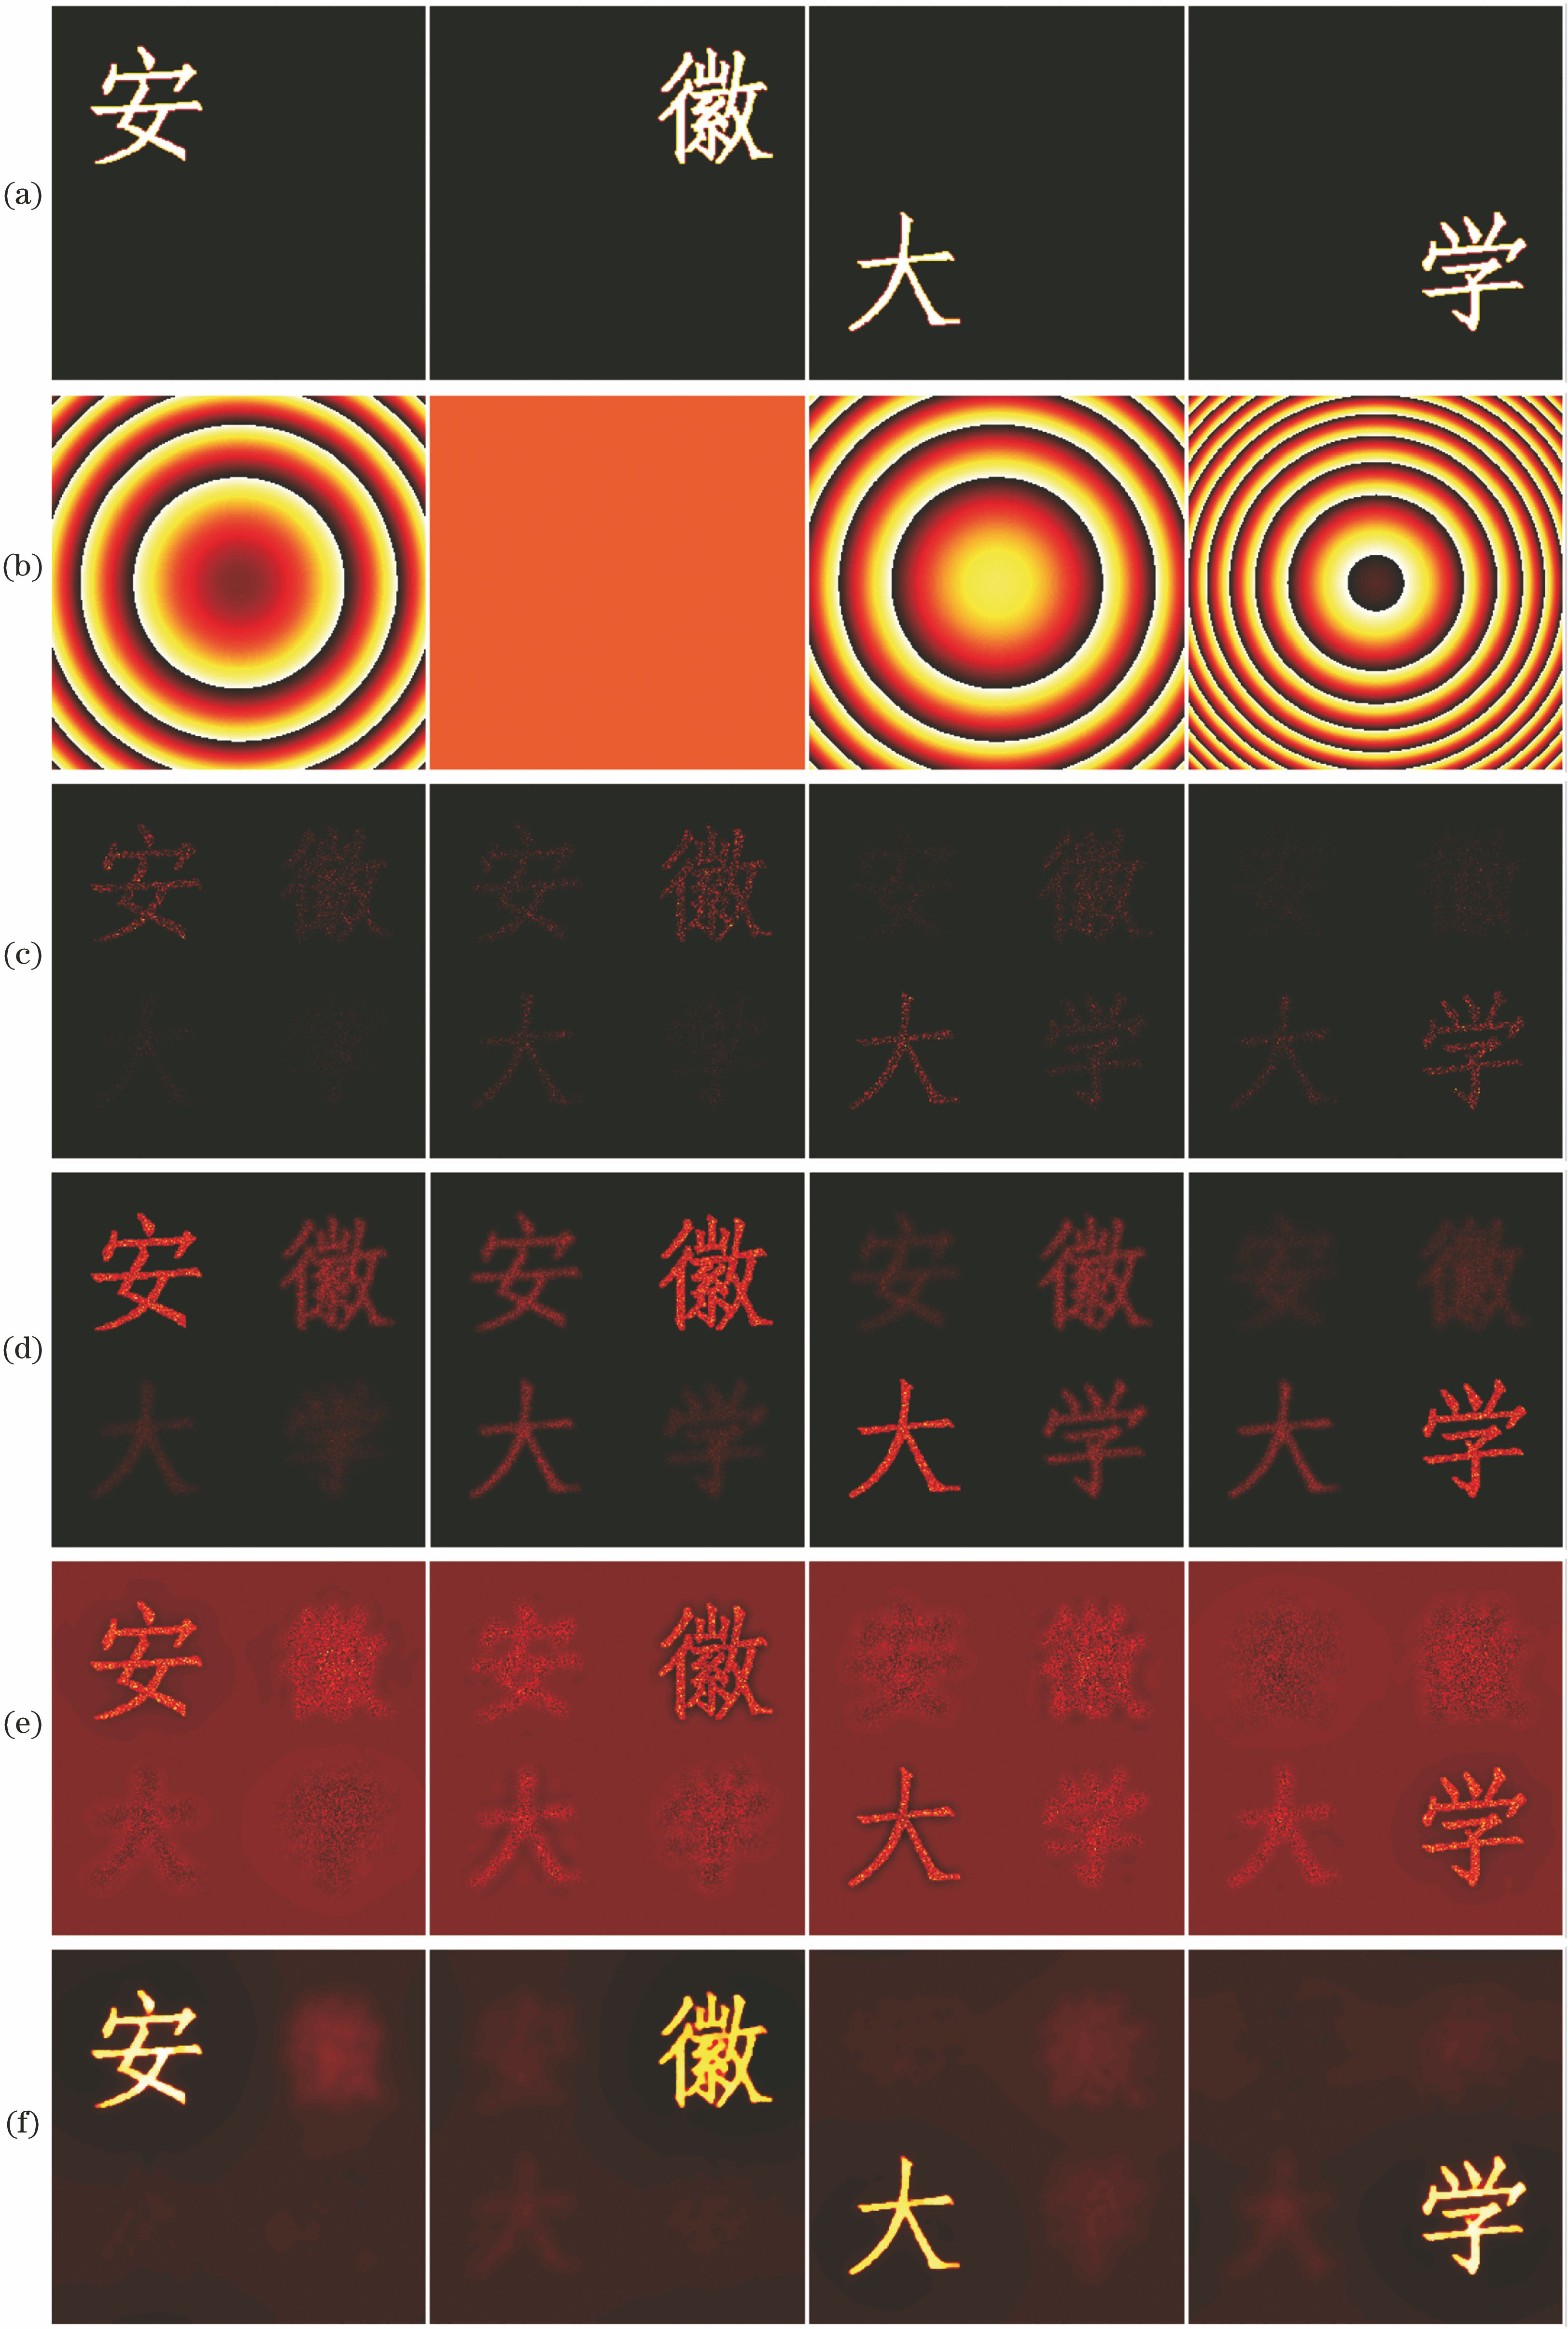 Simulation results of monochromatic diffuse object tomography. (a) 3D object; (b) phase distributions of propagation kernels; (c) back propagation of single speckled realization; (d) back propagation averaged by 30 speckled realizations; (e) back propagation of 30 speckled realizations using Tikhonov regularization; (f) compressive reconstruction of 30 speckled realizations